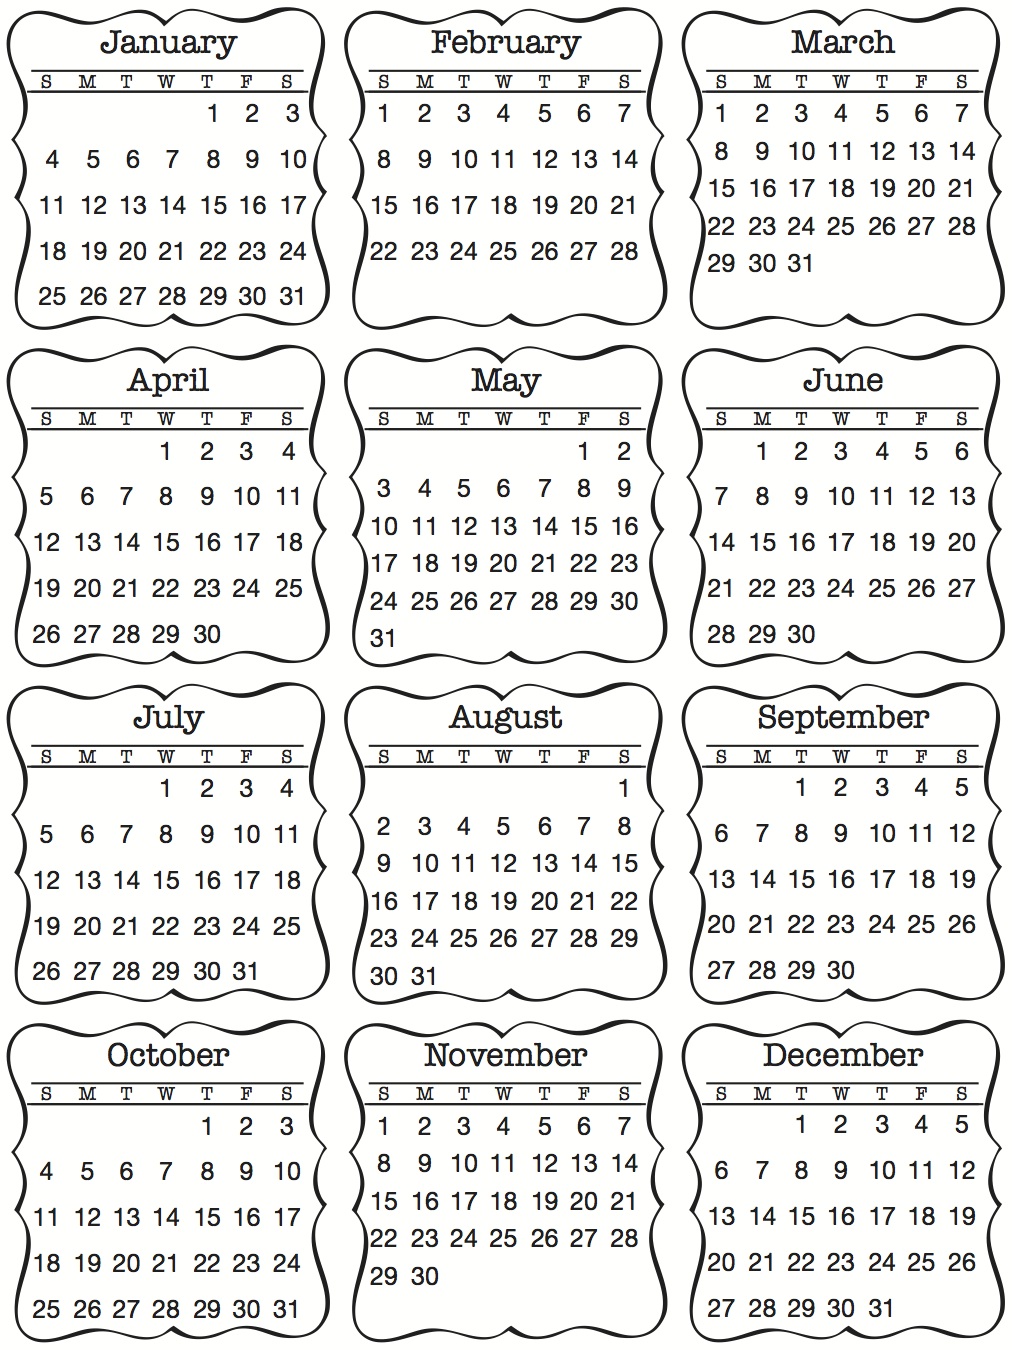 SRM Stickers BLog - New Product Reveal Stickers - #stickers #clear #calendar #2015